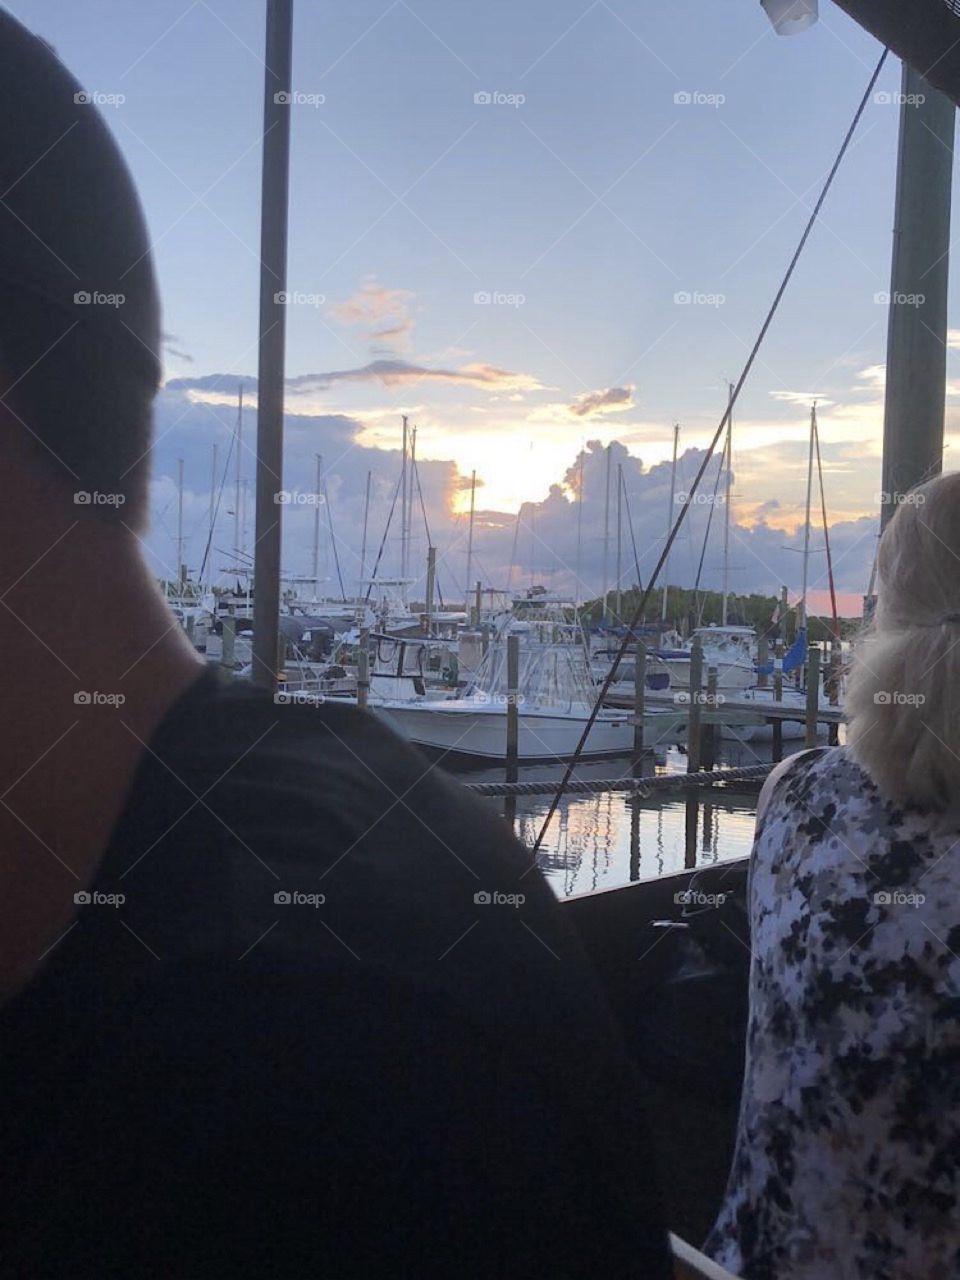 Sunsets always make the evening so much better. This sunset was in Florida on a pier. There were tons of boats and birds everywhere! The night was beautiful and the food was good at an amazing restuarant with an even better view!